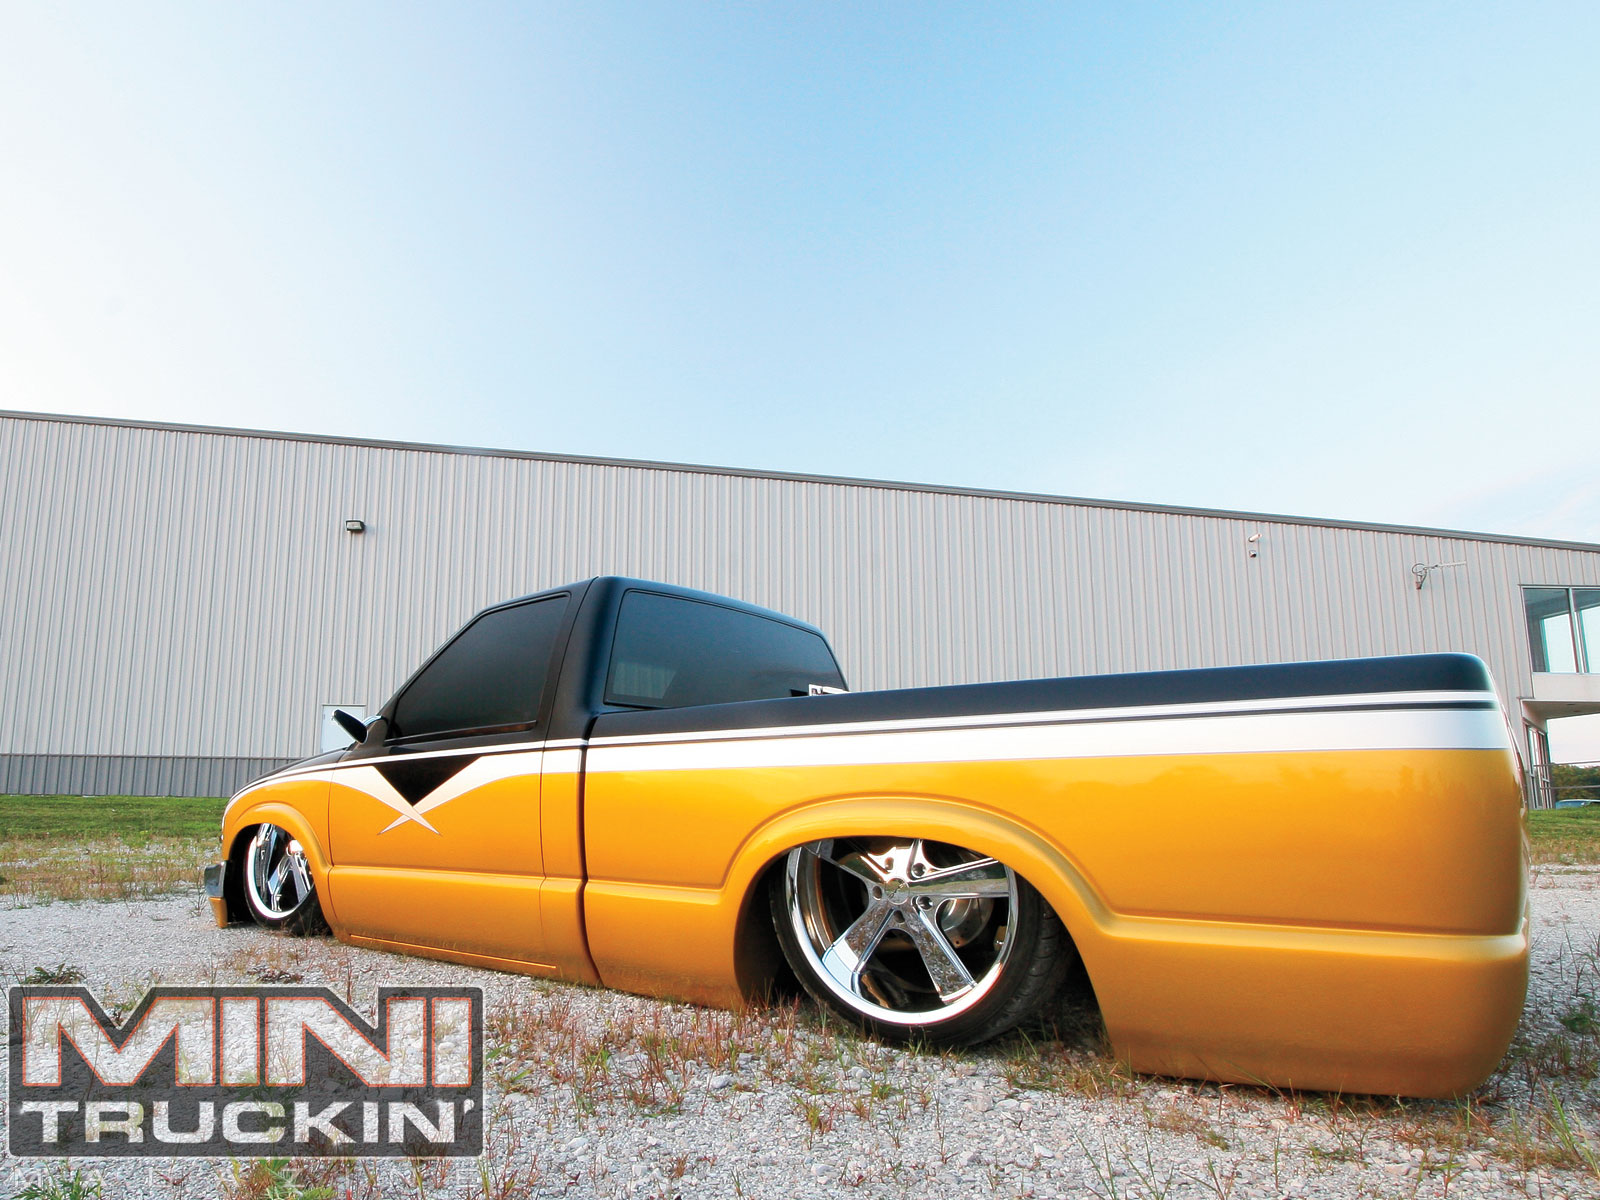 Free download Mini Truckin Wallpaper December 2011 1999 Chevy S10 Rear Angle Photo [1600x1200] for your Desktop, Mobile & Tablet. Explore Mini Truckin Wallpaper. Truckin Wallpaper, Truckin Magazine Wallpaper